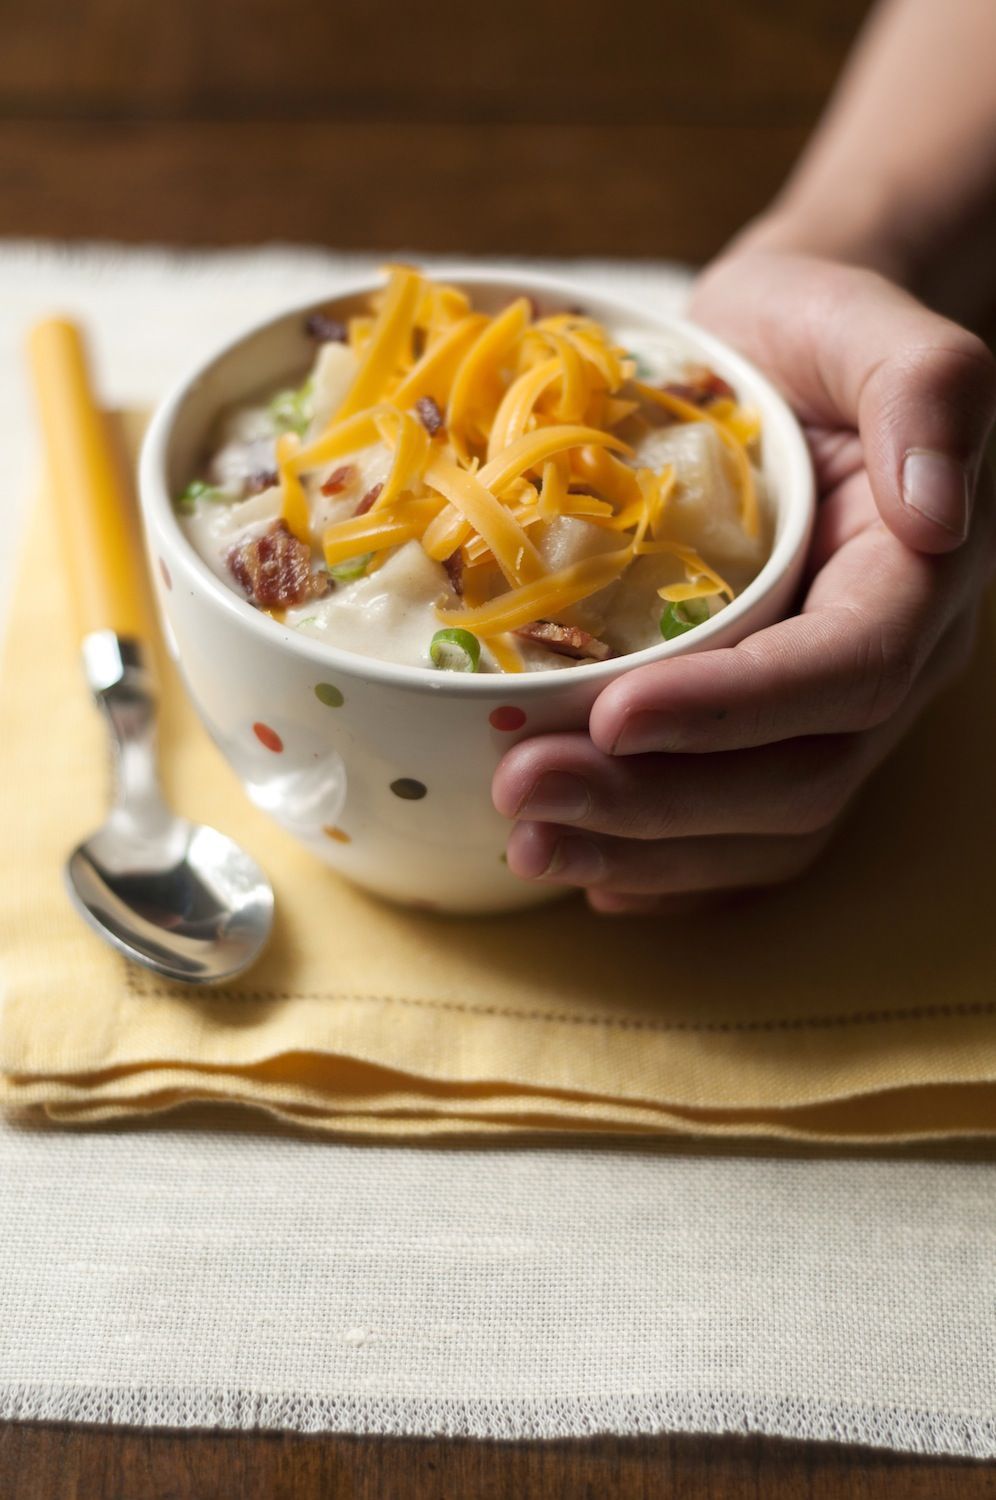 Loaded Baked Potato Soup with Bacon, Cheddar, and Green Onions